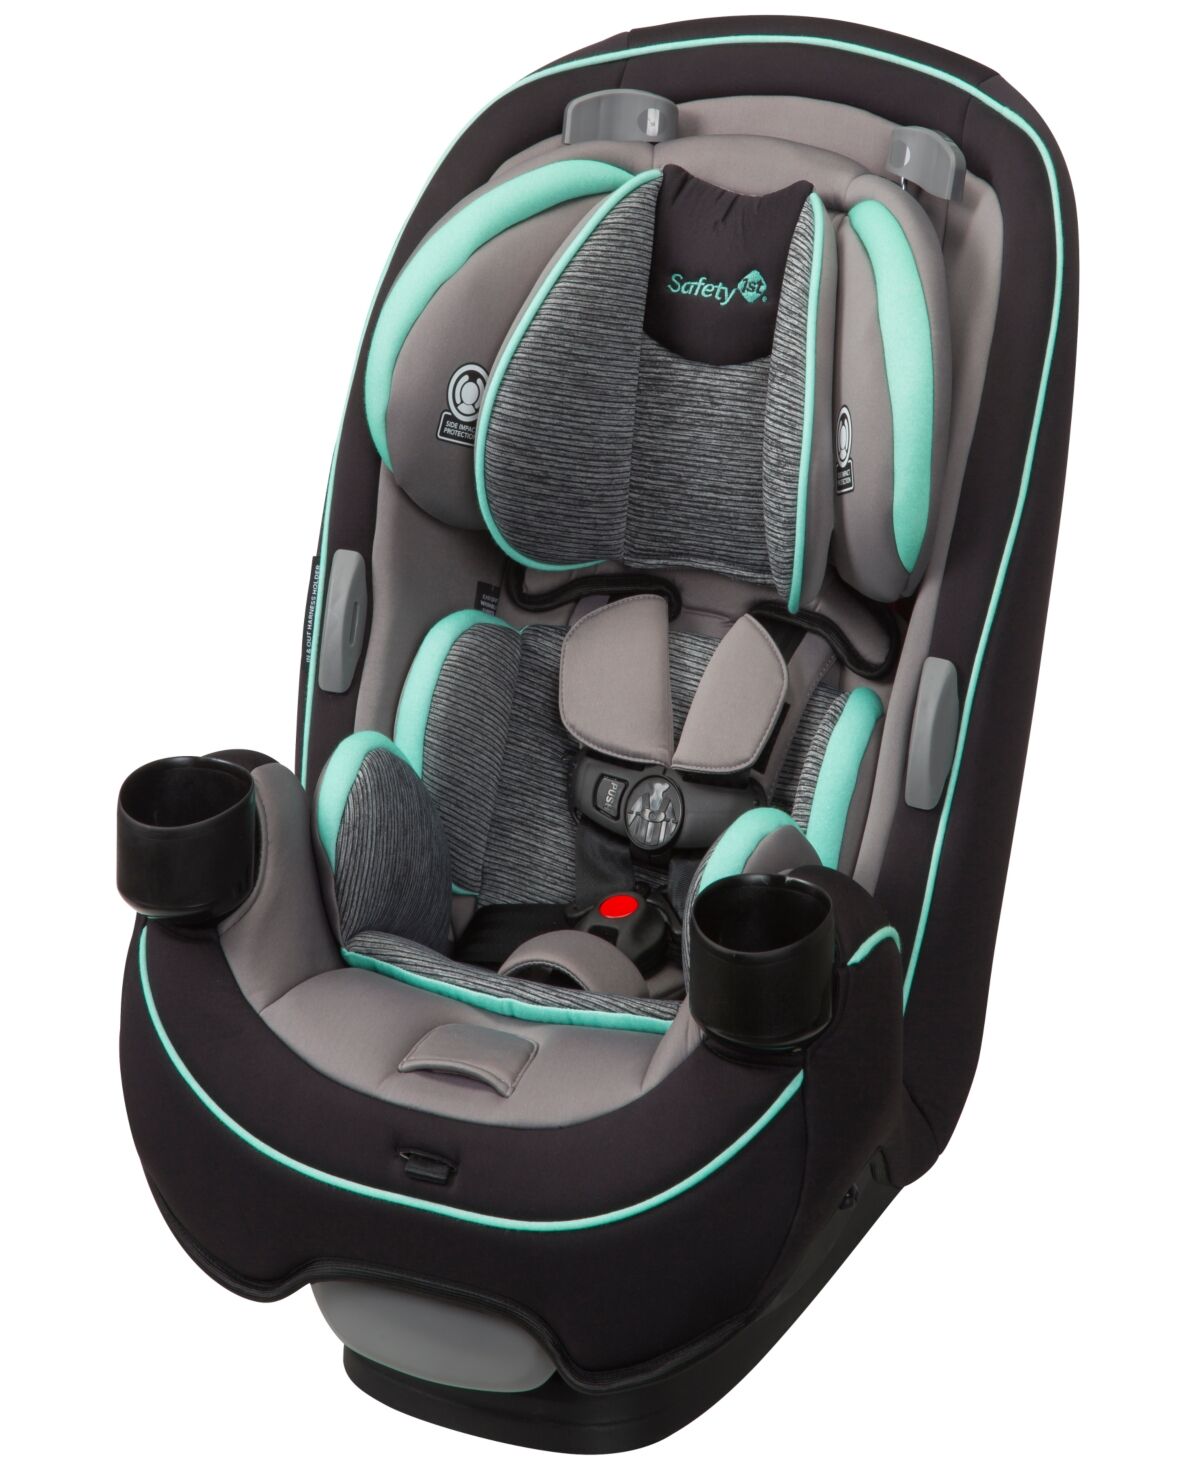 Safety 1st Grow and Go 3-in-1 Convertible Car Seat - Aqua Pop